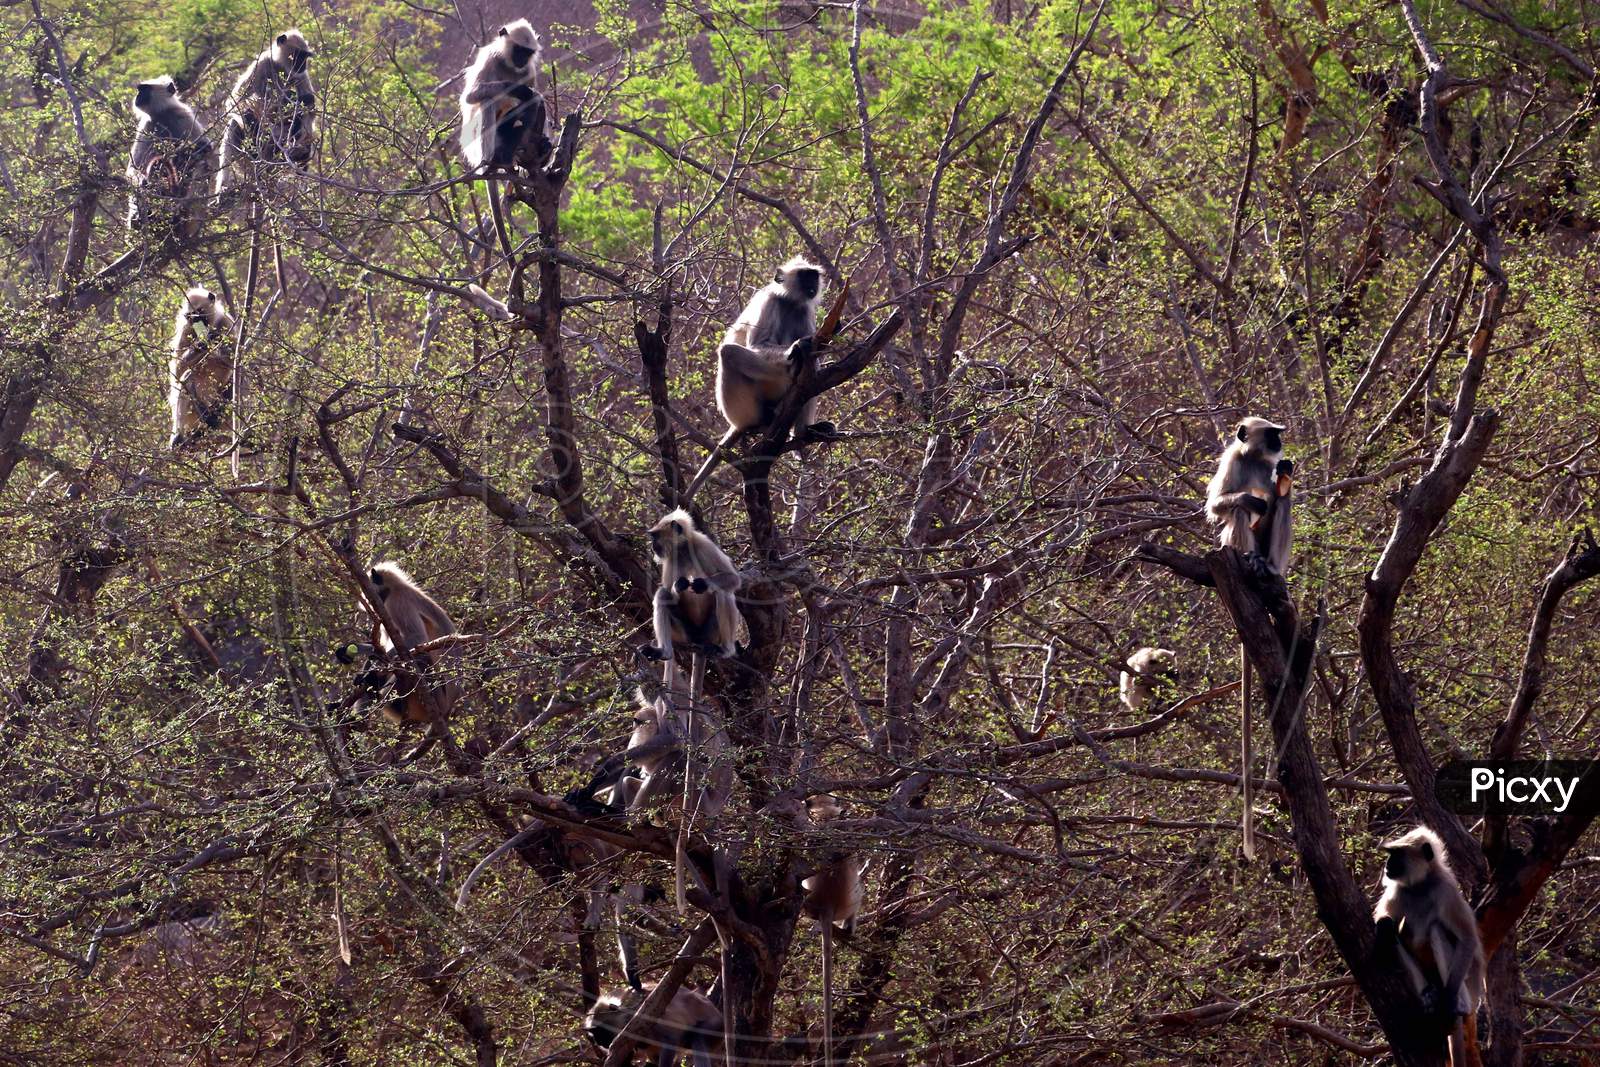 A Group Of Langur Monkeys Sit On The Branches Of A Tree In Pushkar, Rajasthan, India On 25 April 2020.